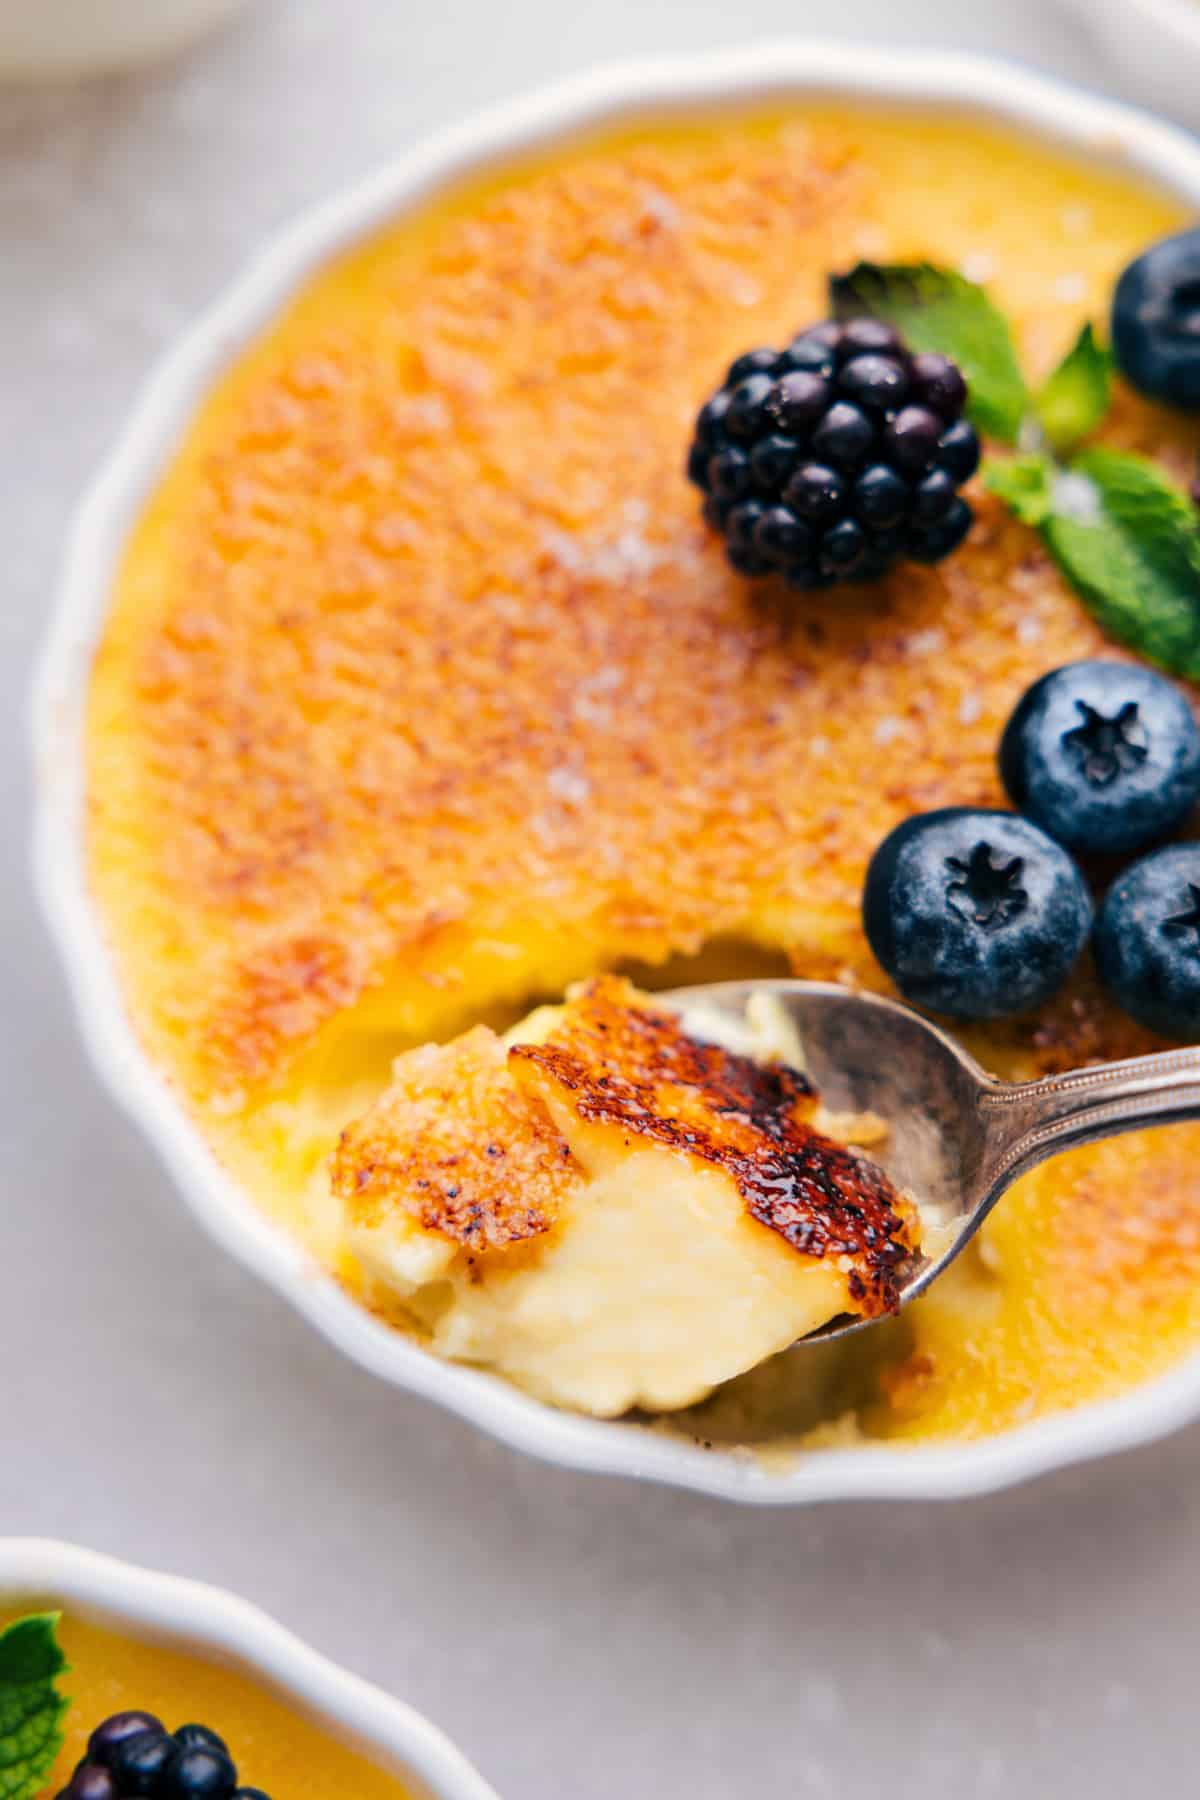 Finished creme brûlée with a perfectly caramelized top, spoon revealing its creamy center.